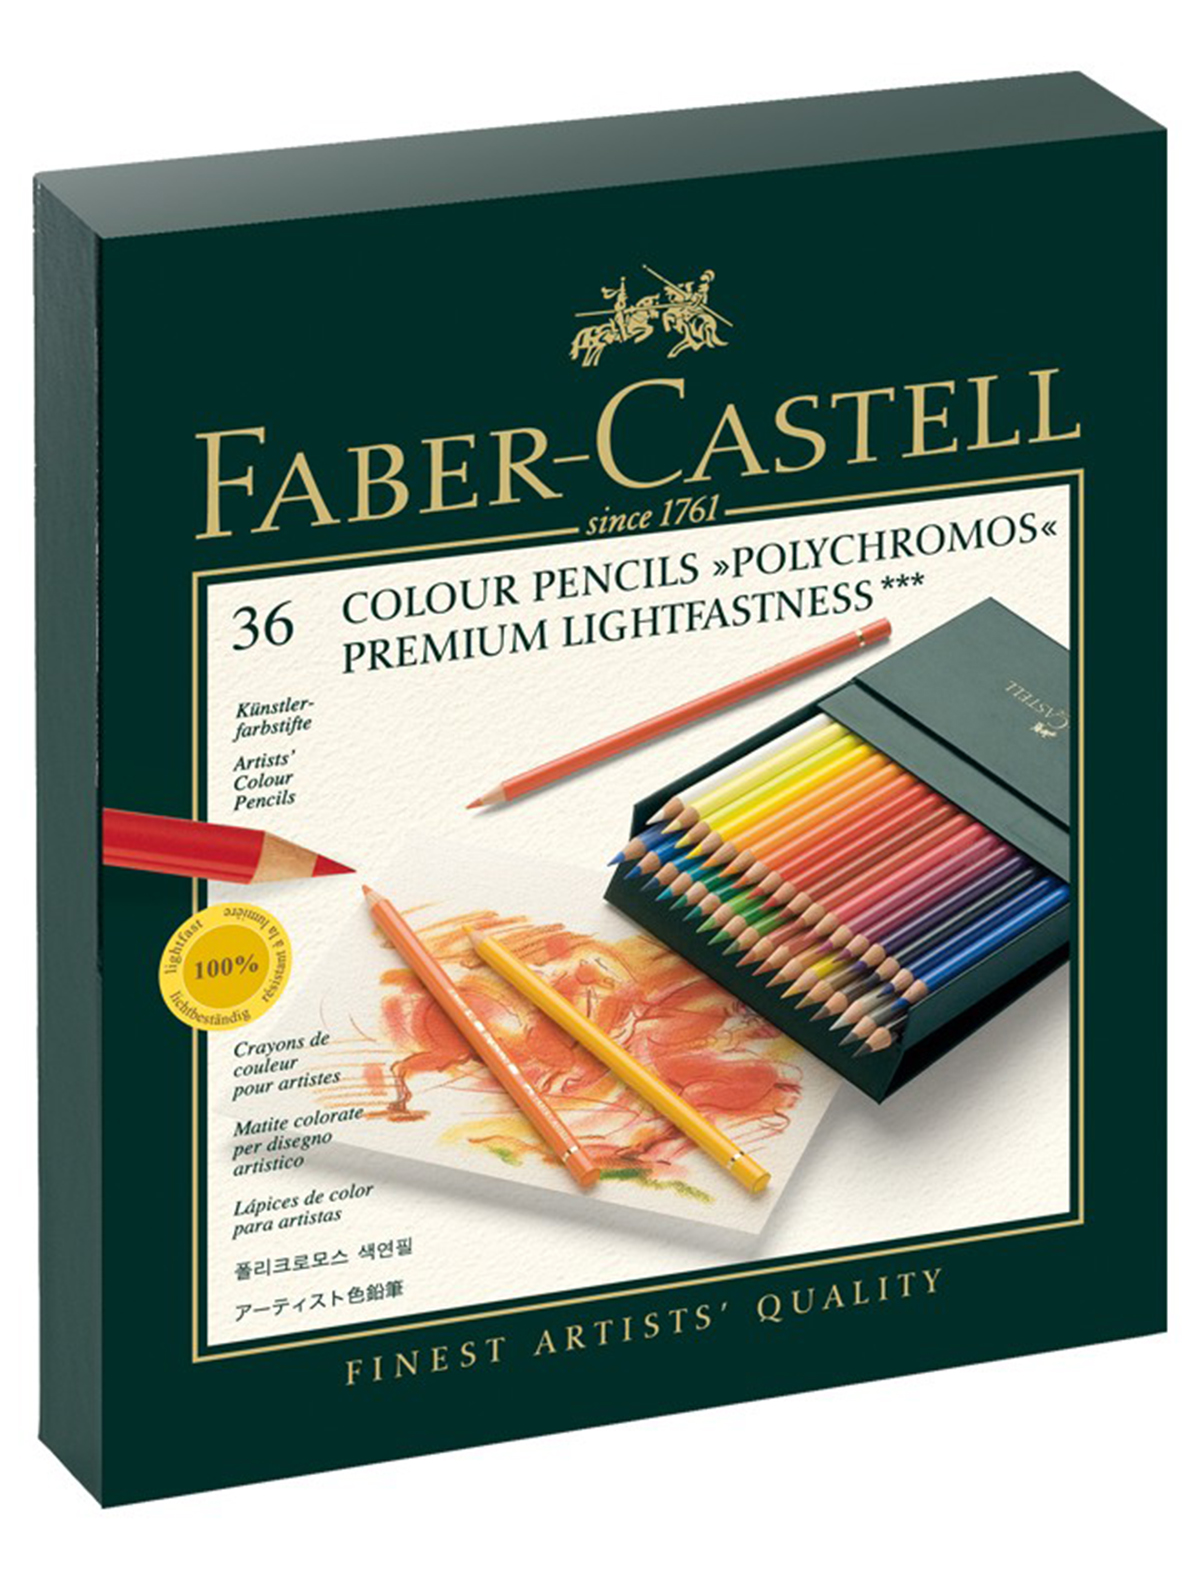 Карандаш Faber-Castell faber castell 15 erasable crayons sharpener and eraser gift